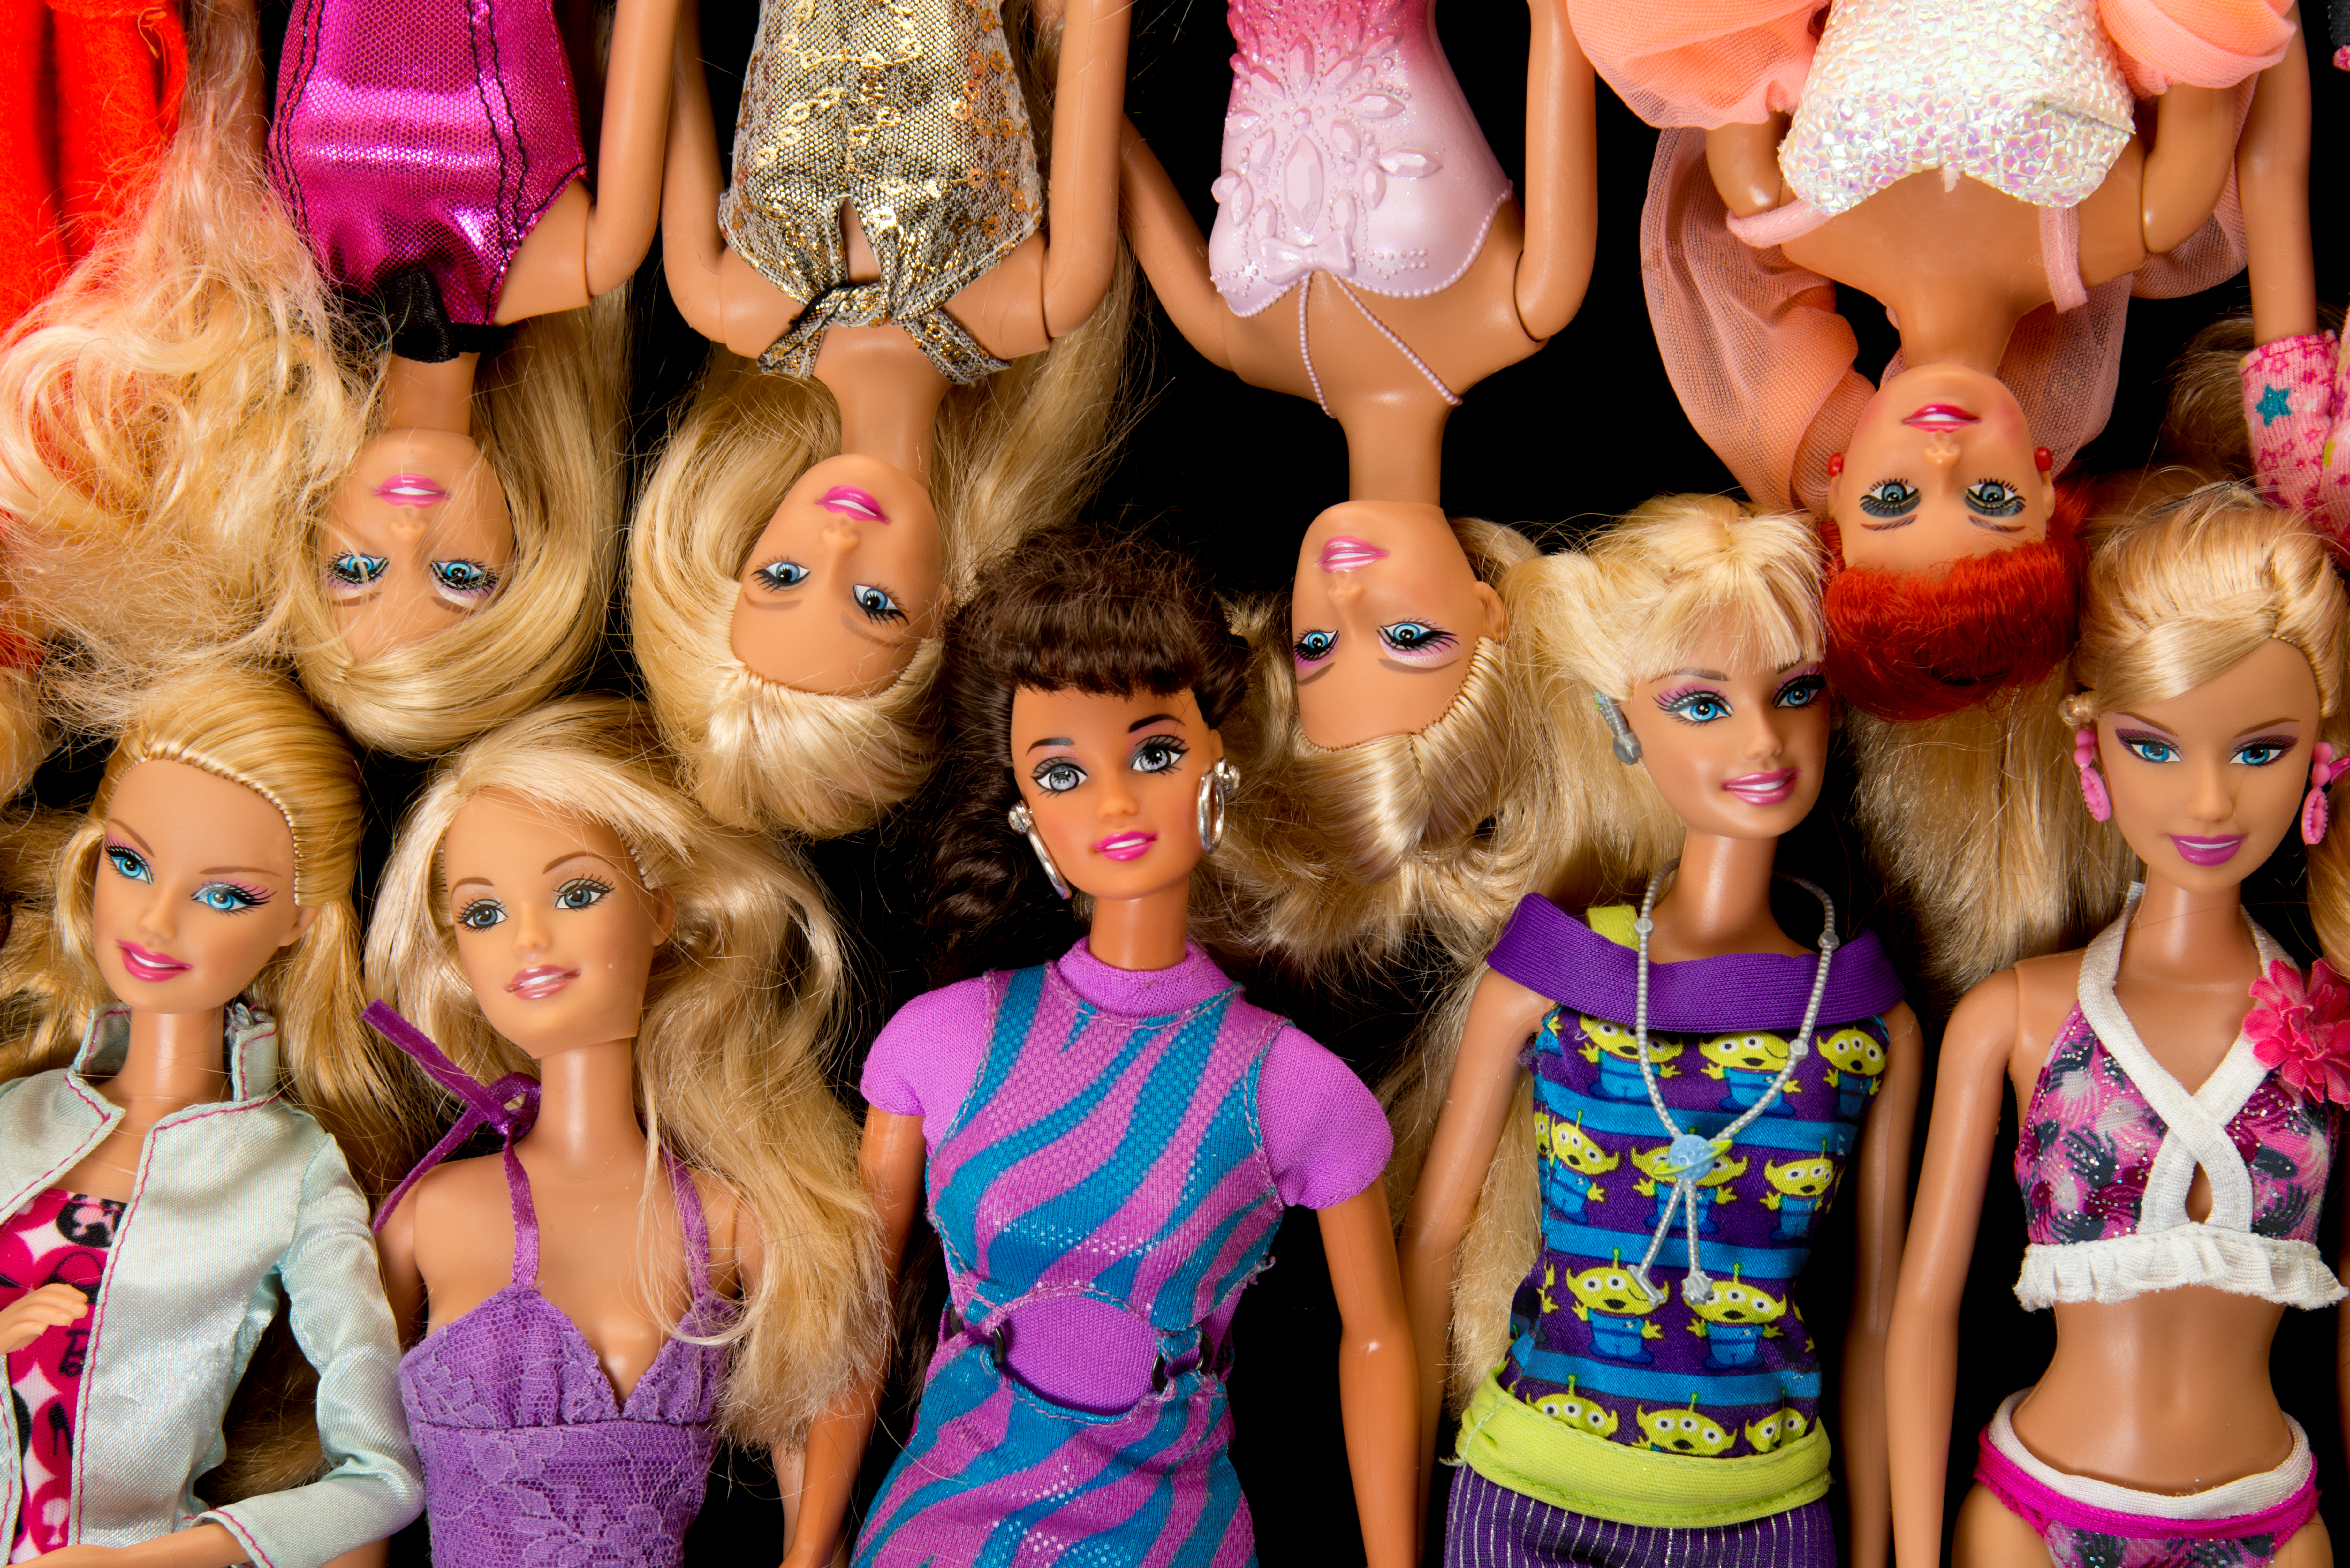 The New Barbie Doll Has a Groundbreaking Career